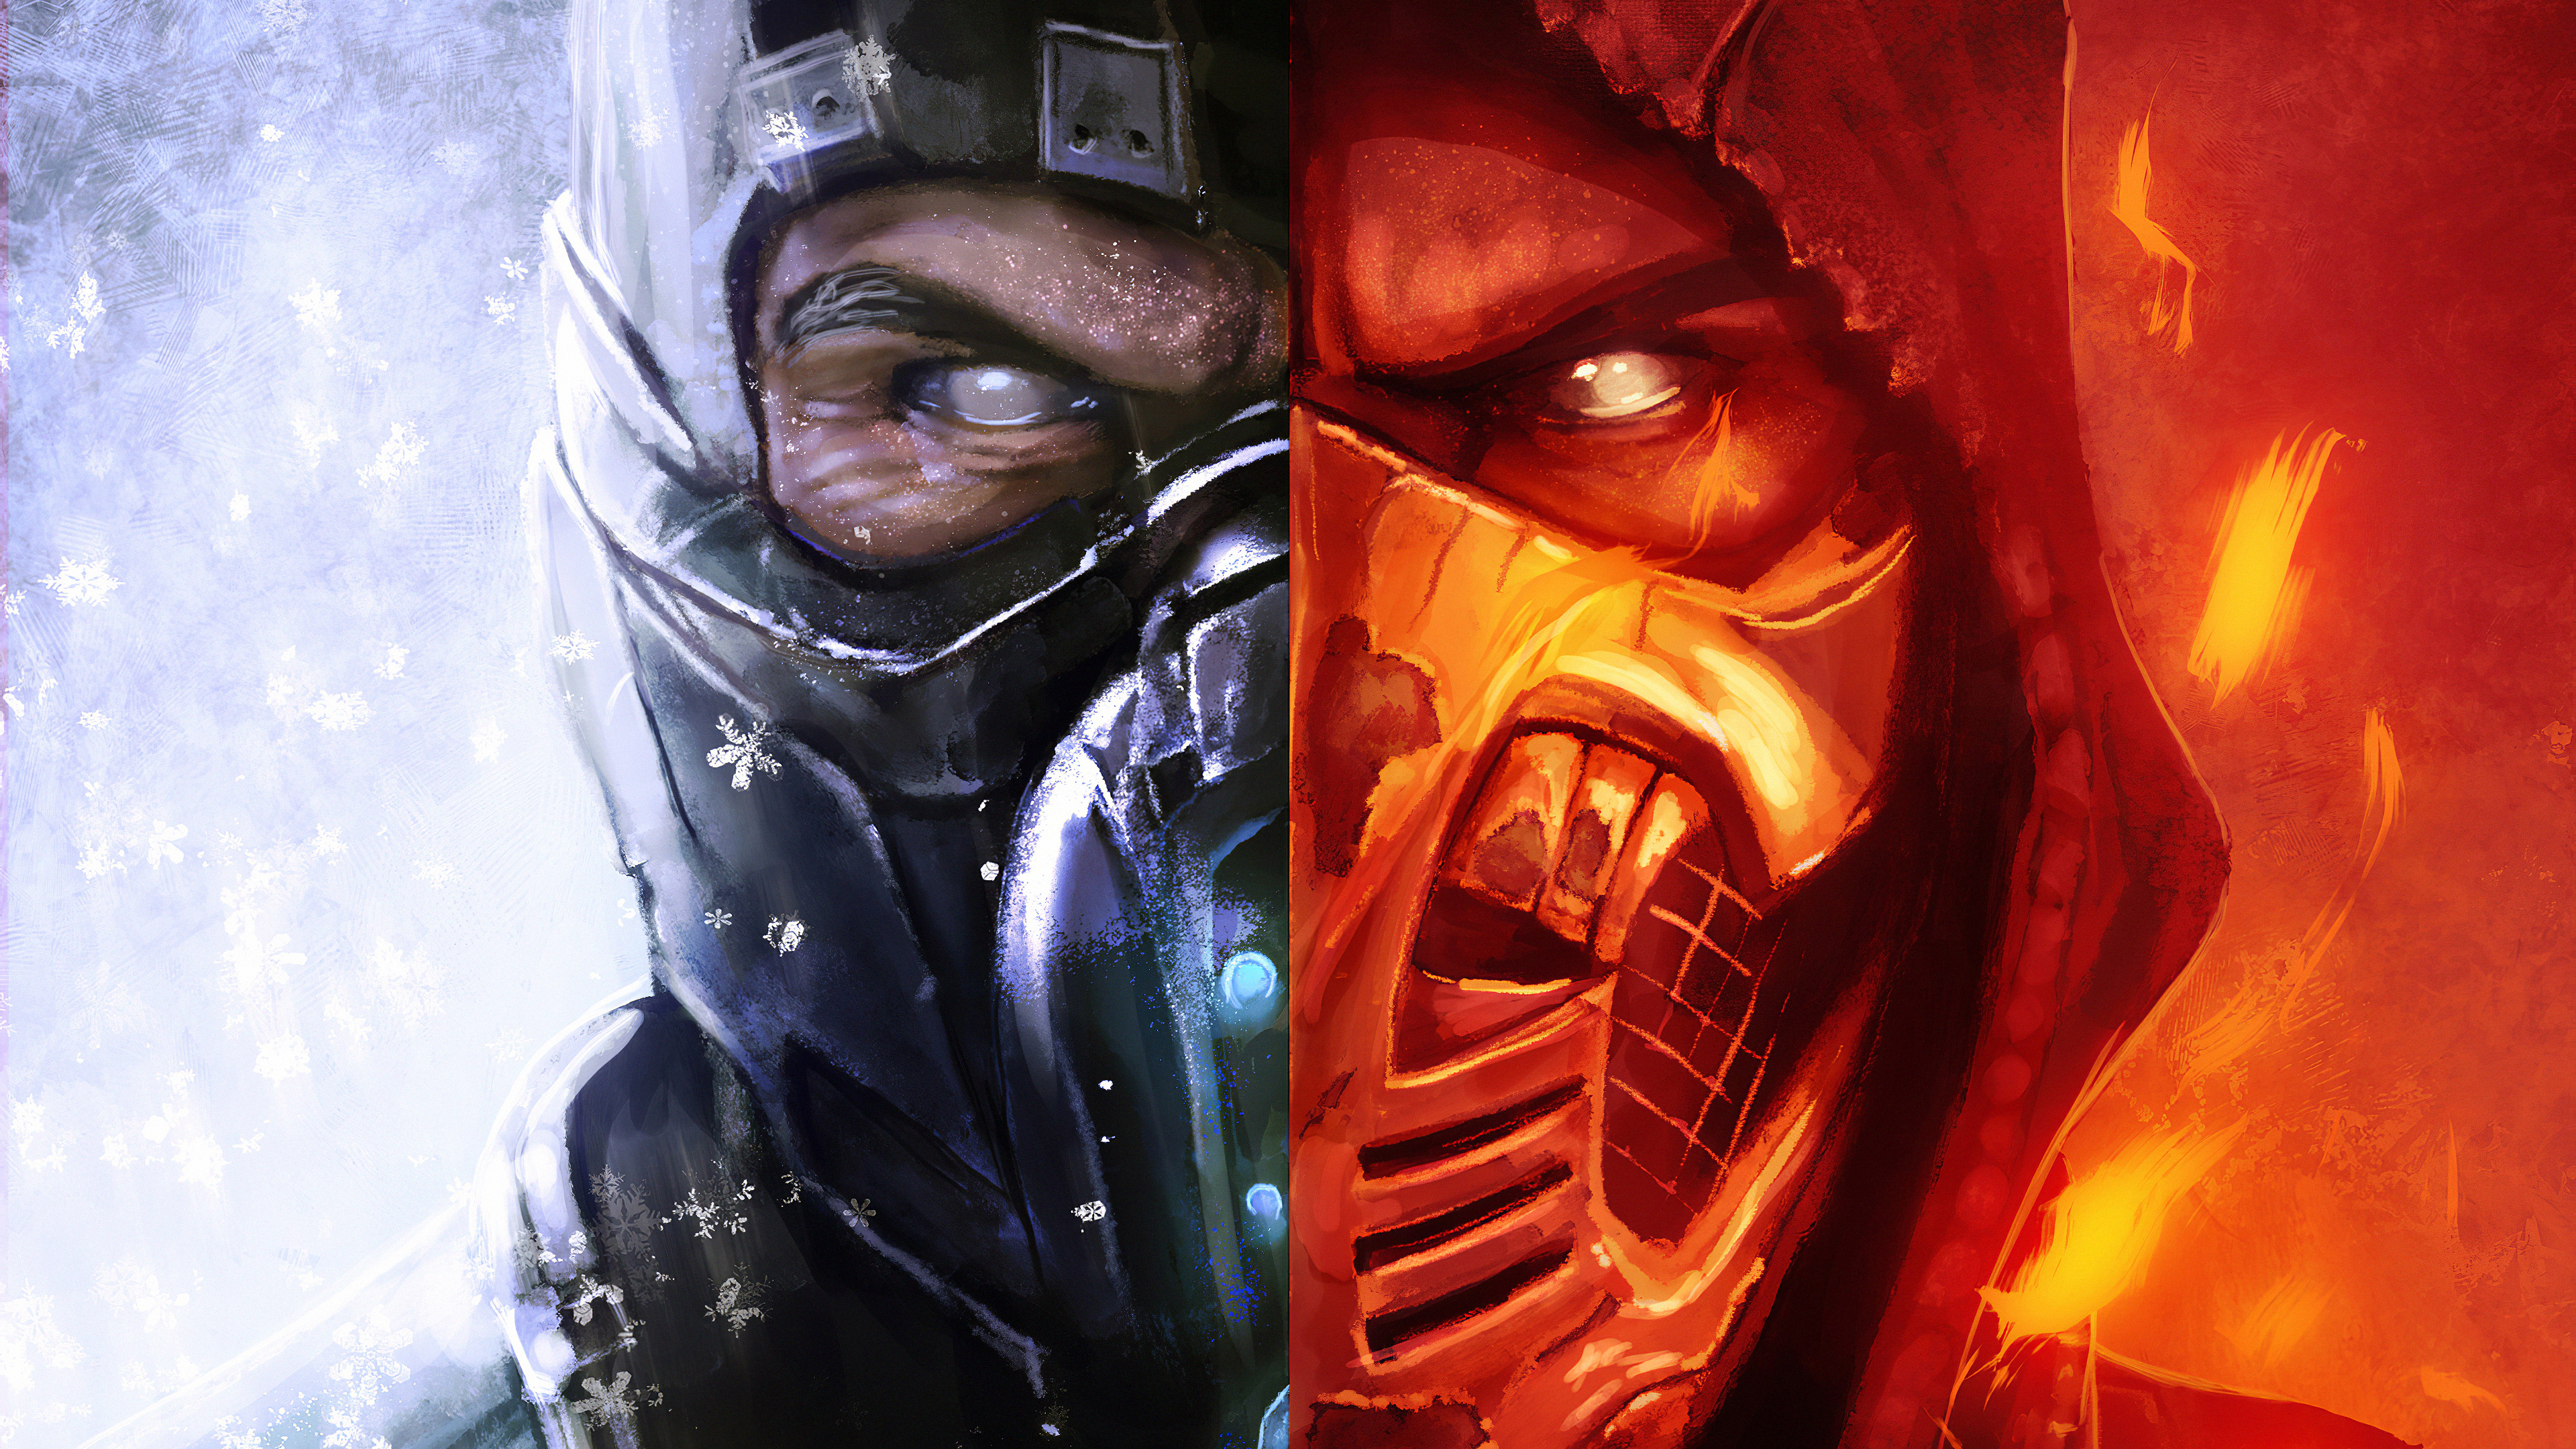 mortal kombat 11, mortal kombat, sub zero (mortal kombat), video game, scorpion (mortal kombat) for android